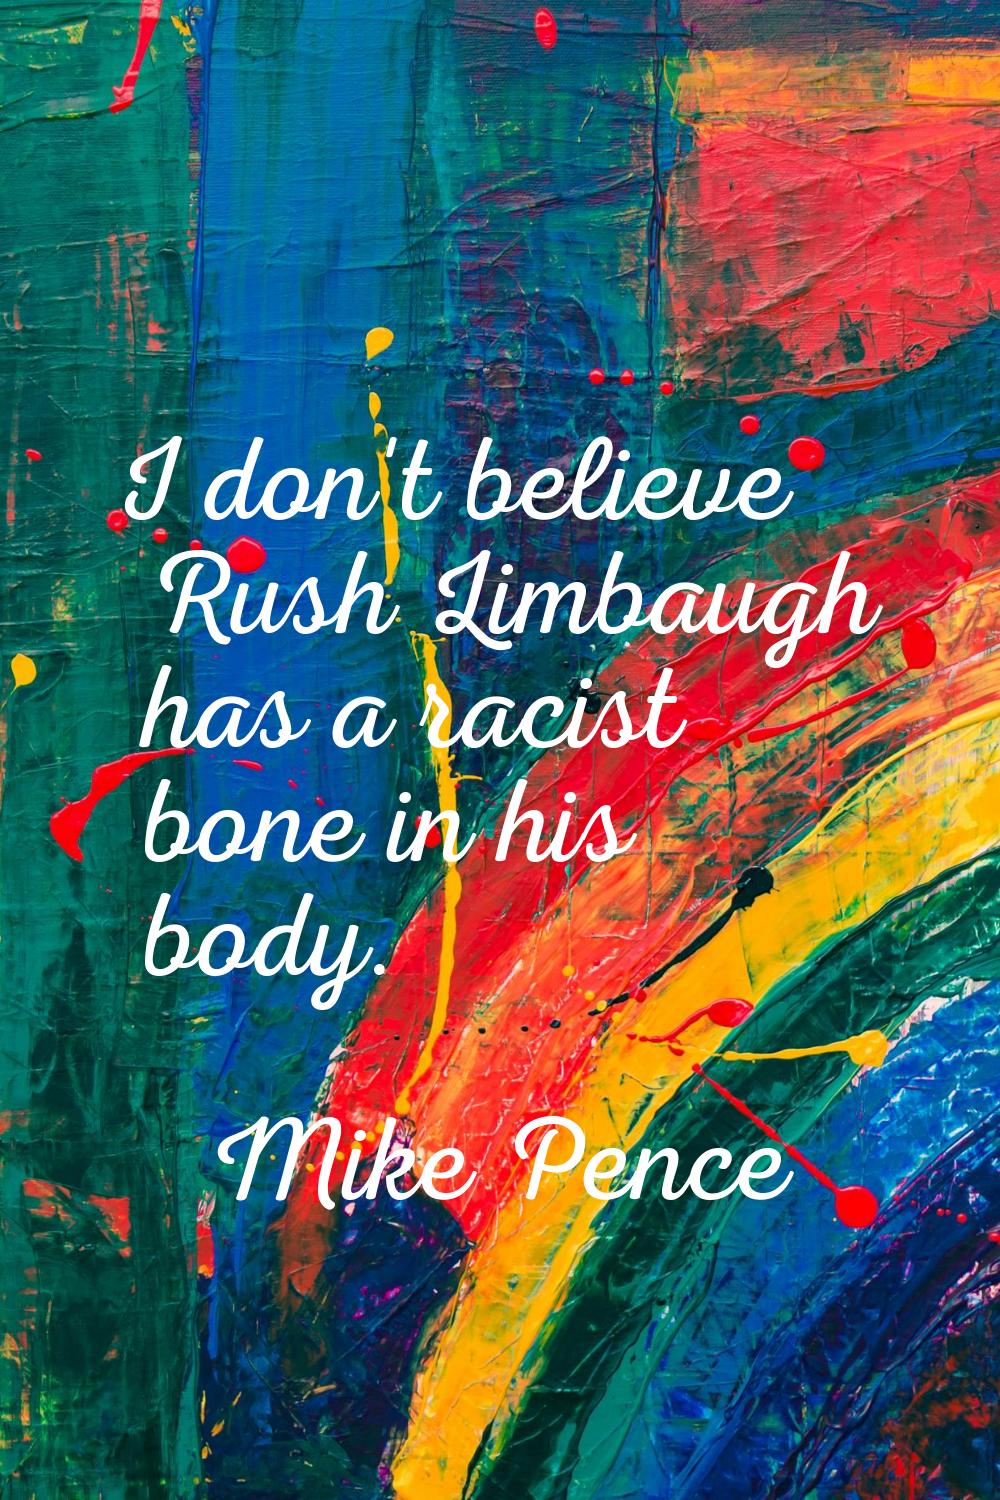 I don't believe Rush Limbaugh has a racist bone in his body.